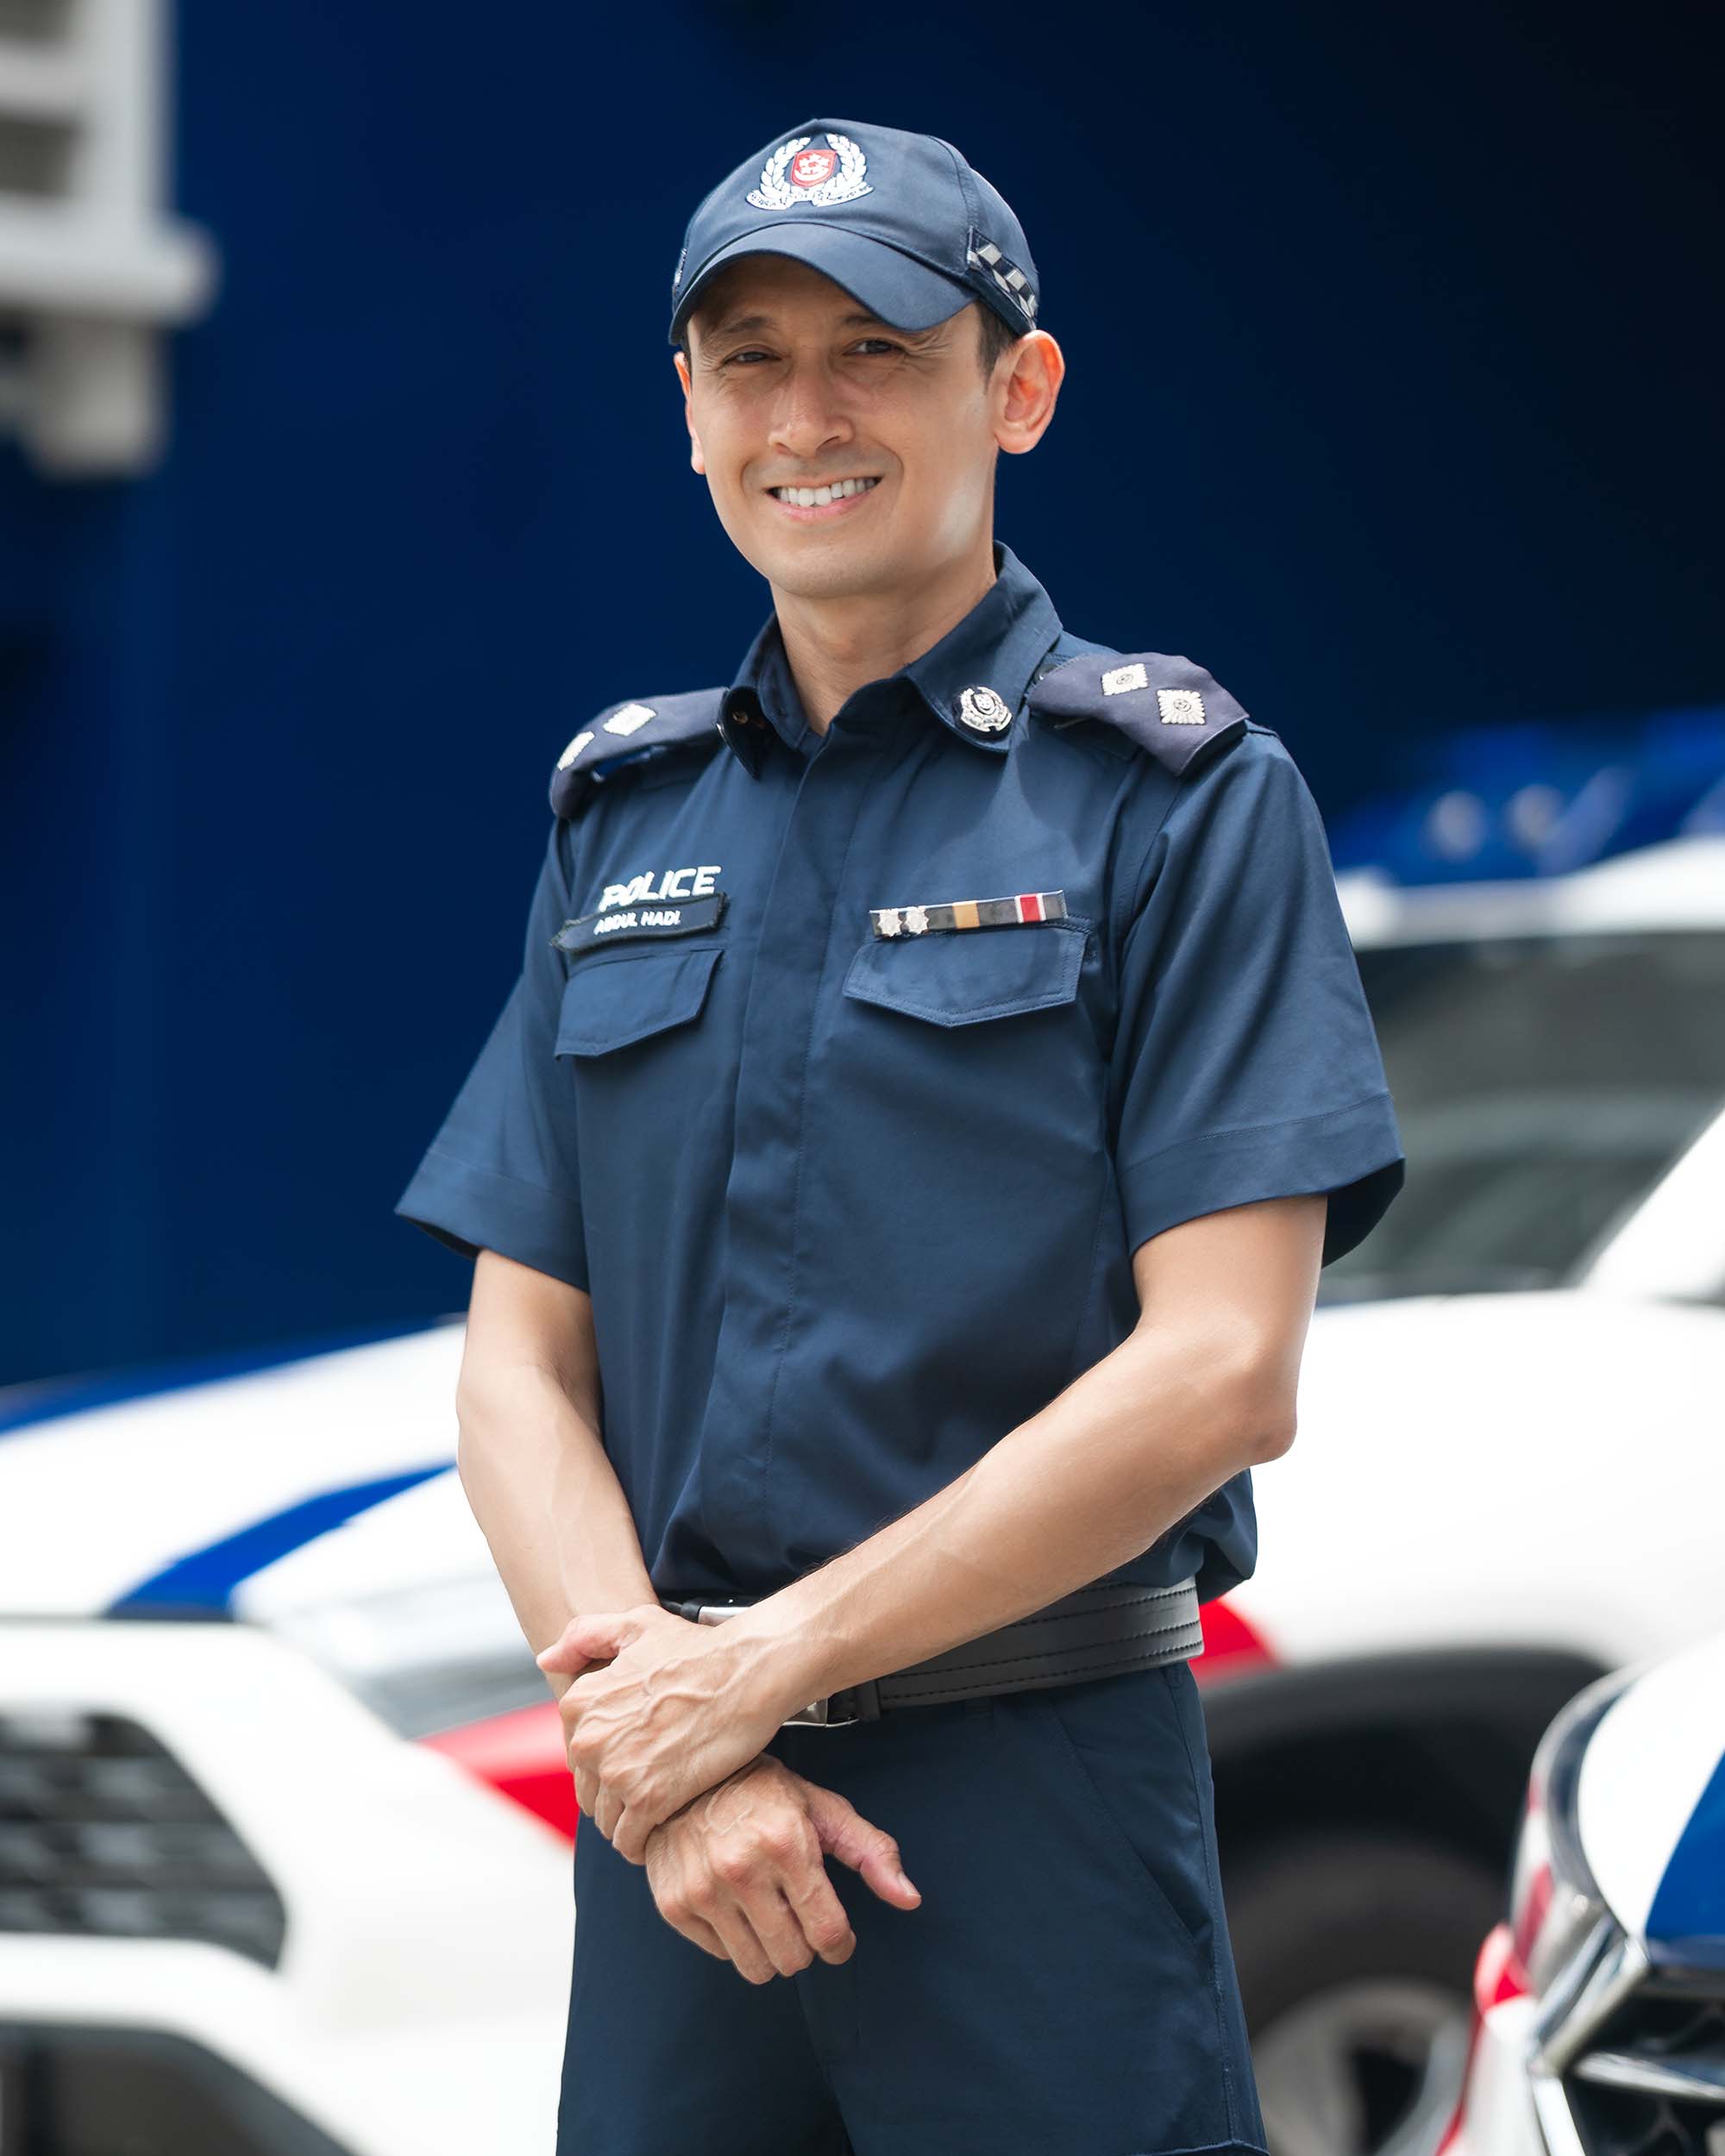 Insp Hadi was one of the first Police officers that arrived at the accident scene.